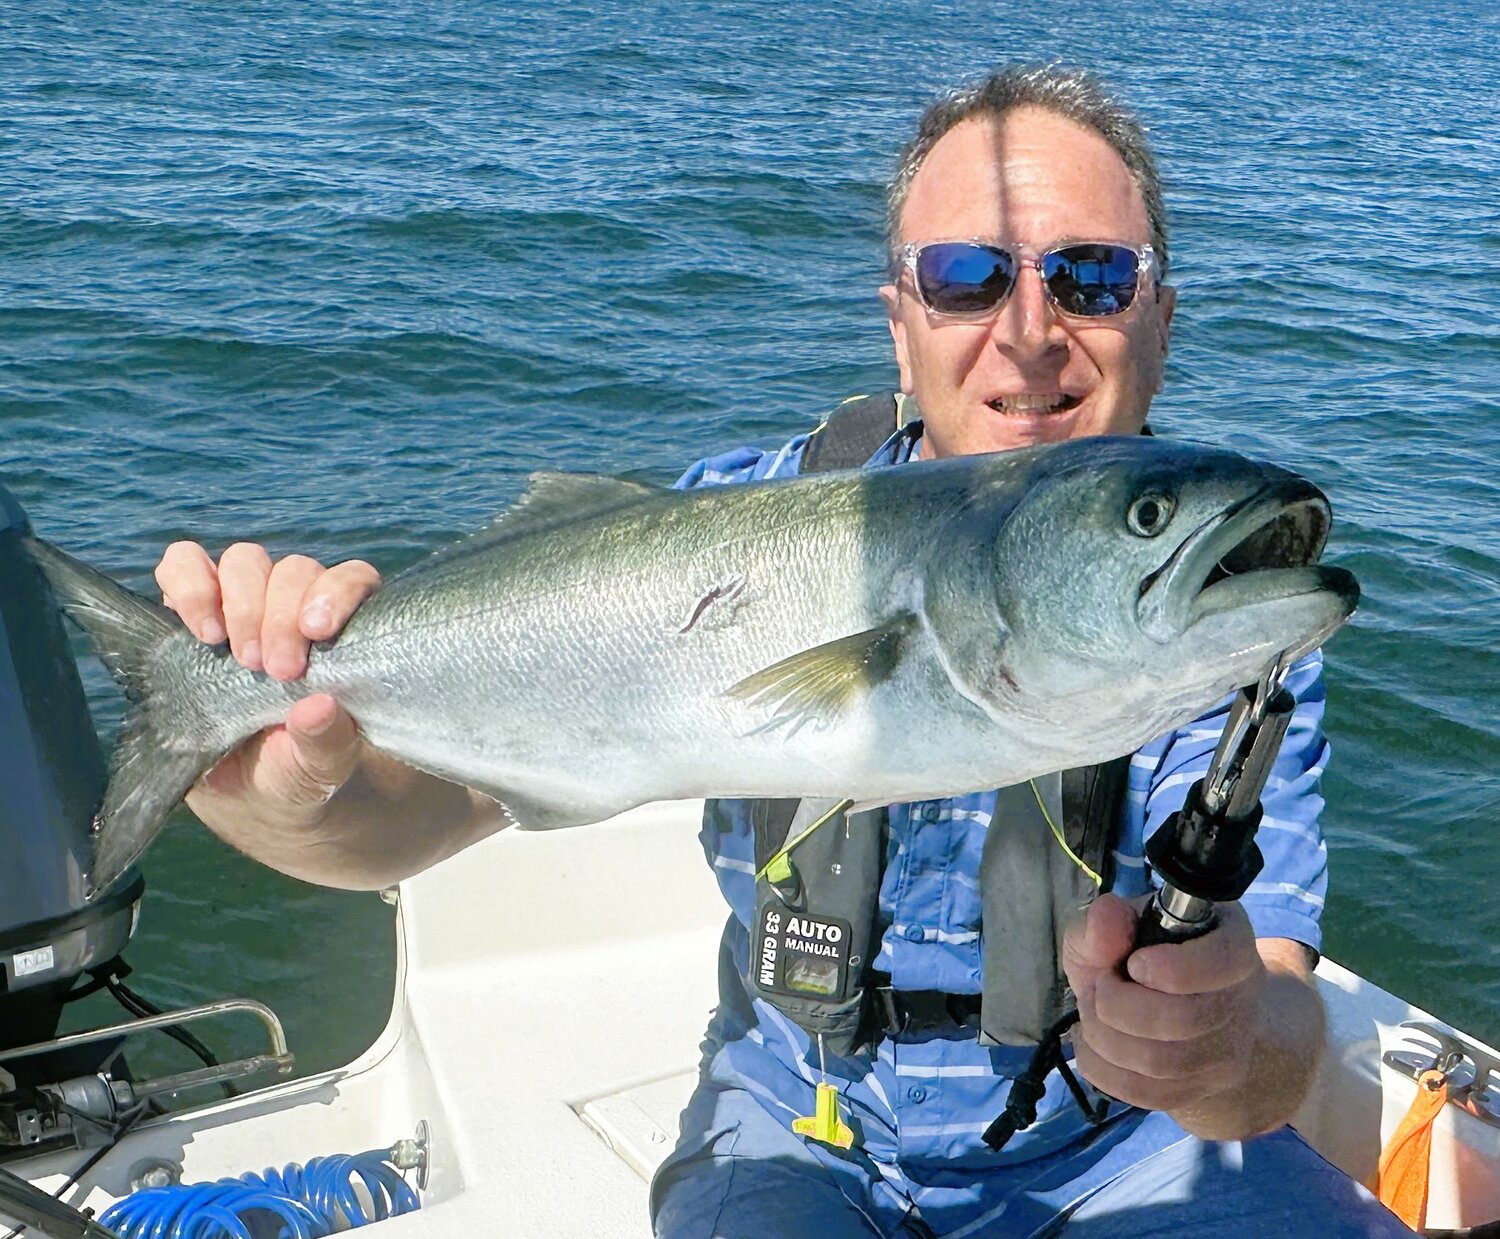 Steve Brustein with a bluefish caught on a Yo-Zuri Crystal Minnow swimming lure off Hope Island on Sunday.